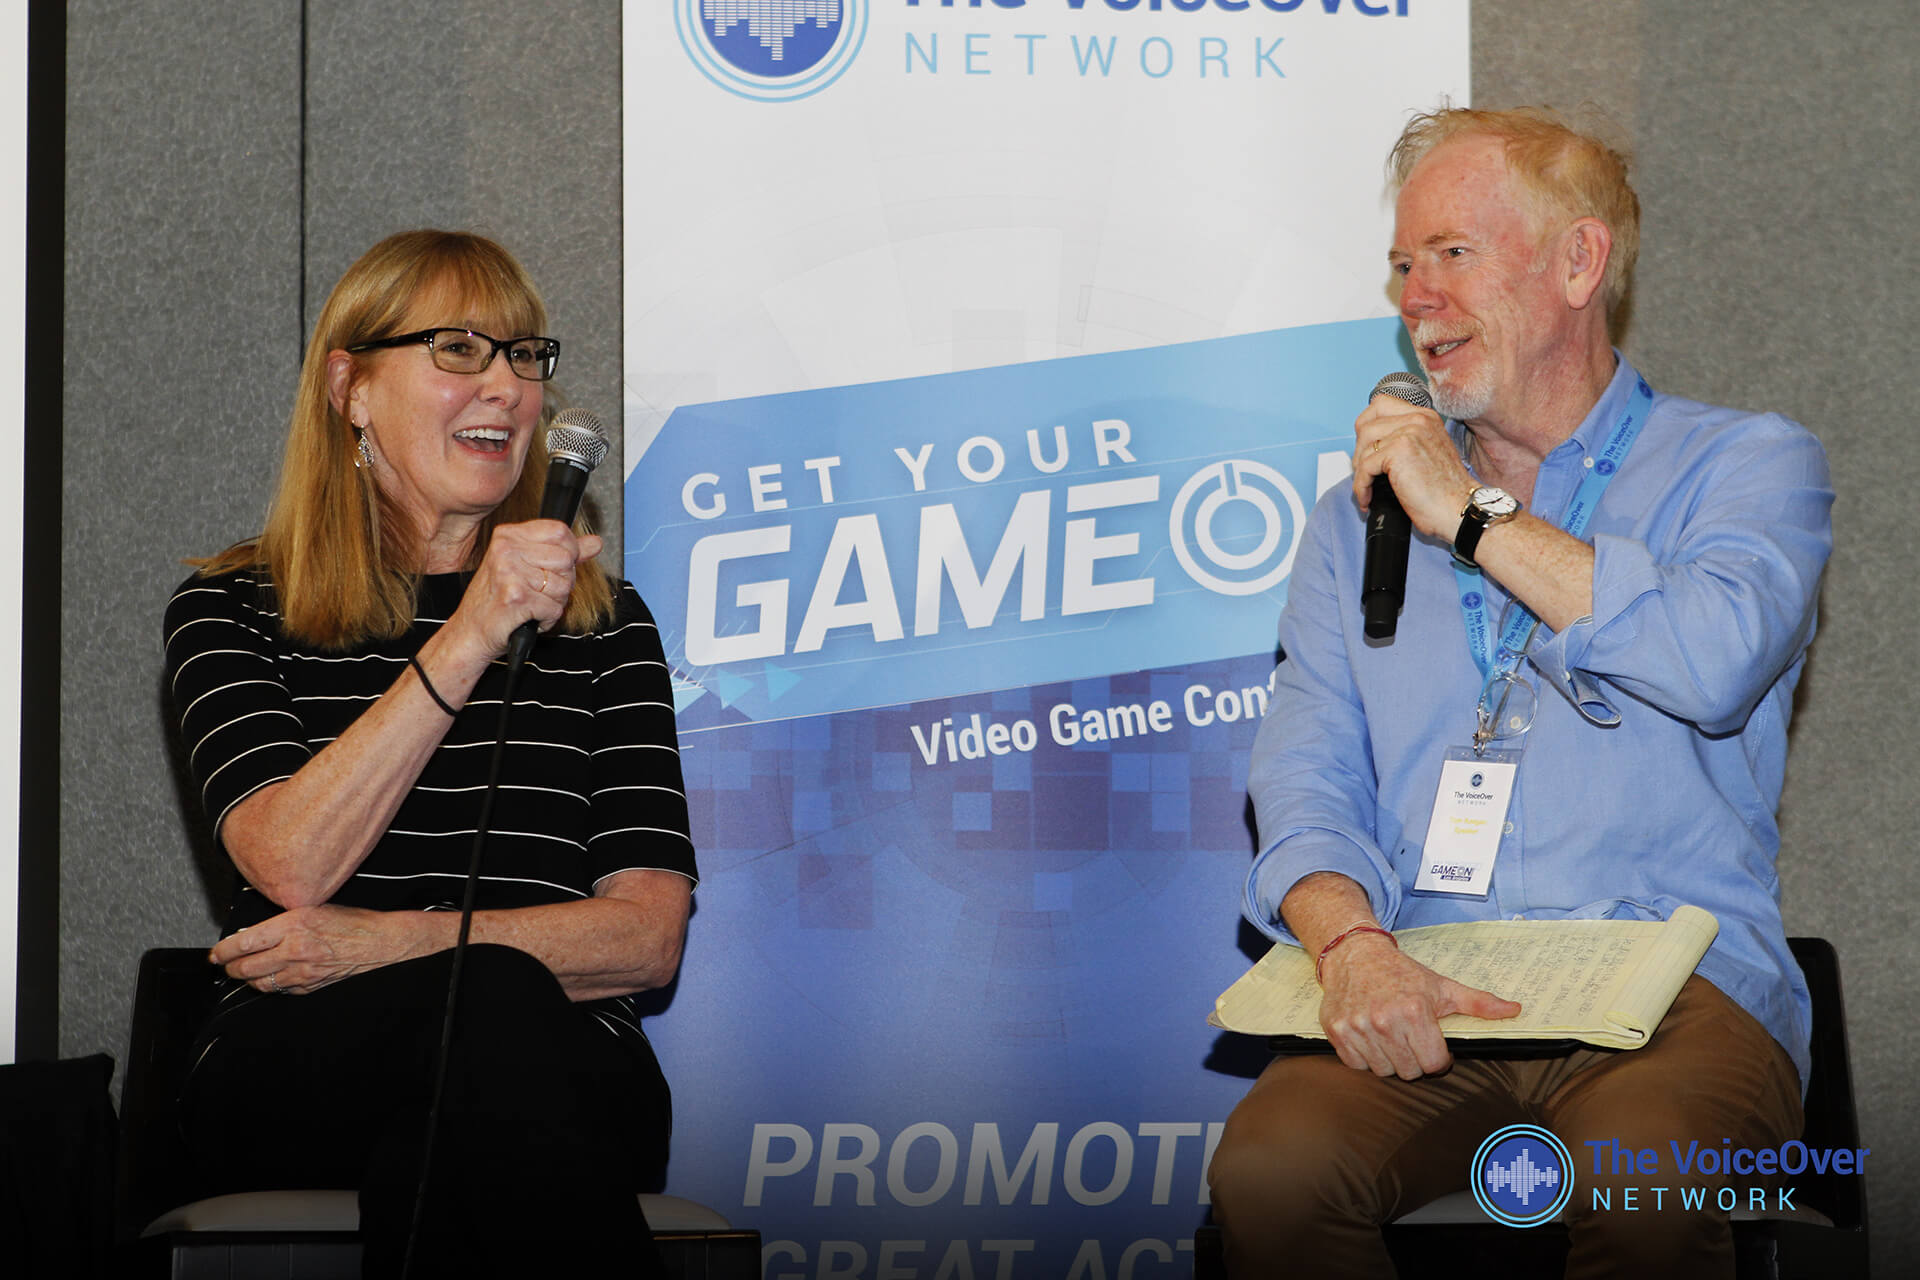 The VoiceOver Network Gameover Event Img